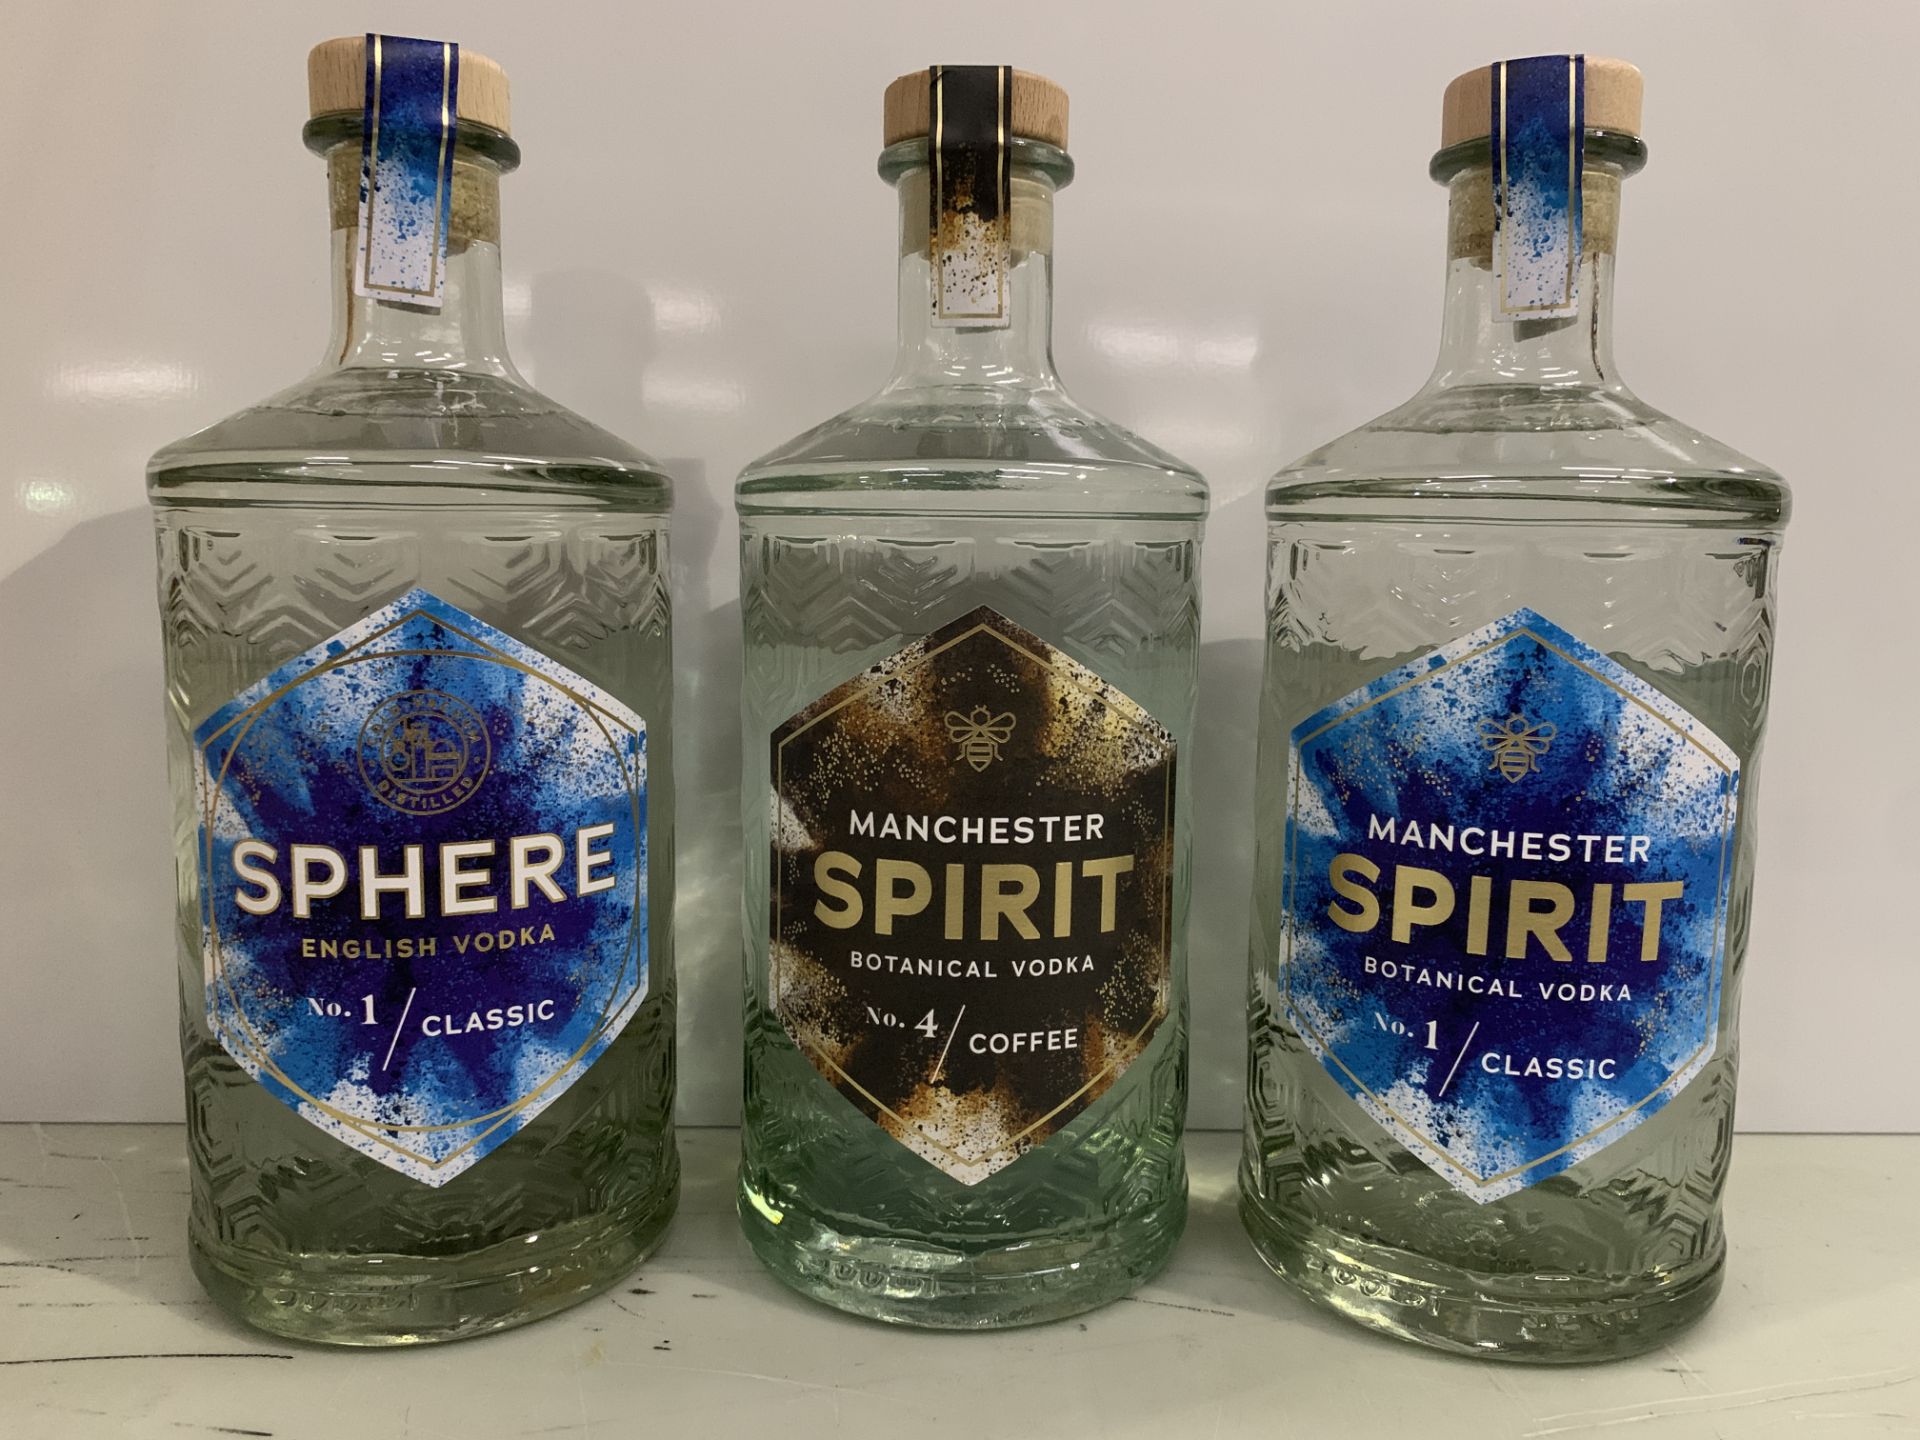 3 x Bottles of Vodka: 1 x Sphere No.1 Classic 70cl 40%; 1 x Spirit No.1 Classic 70cl 40% and 1 x Spi